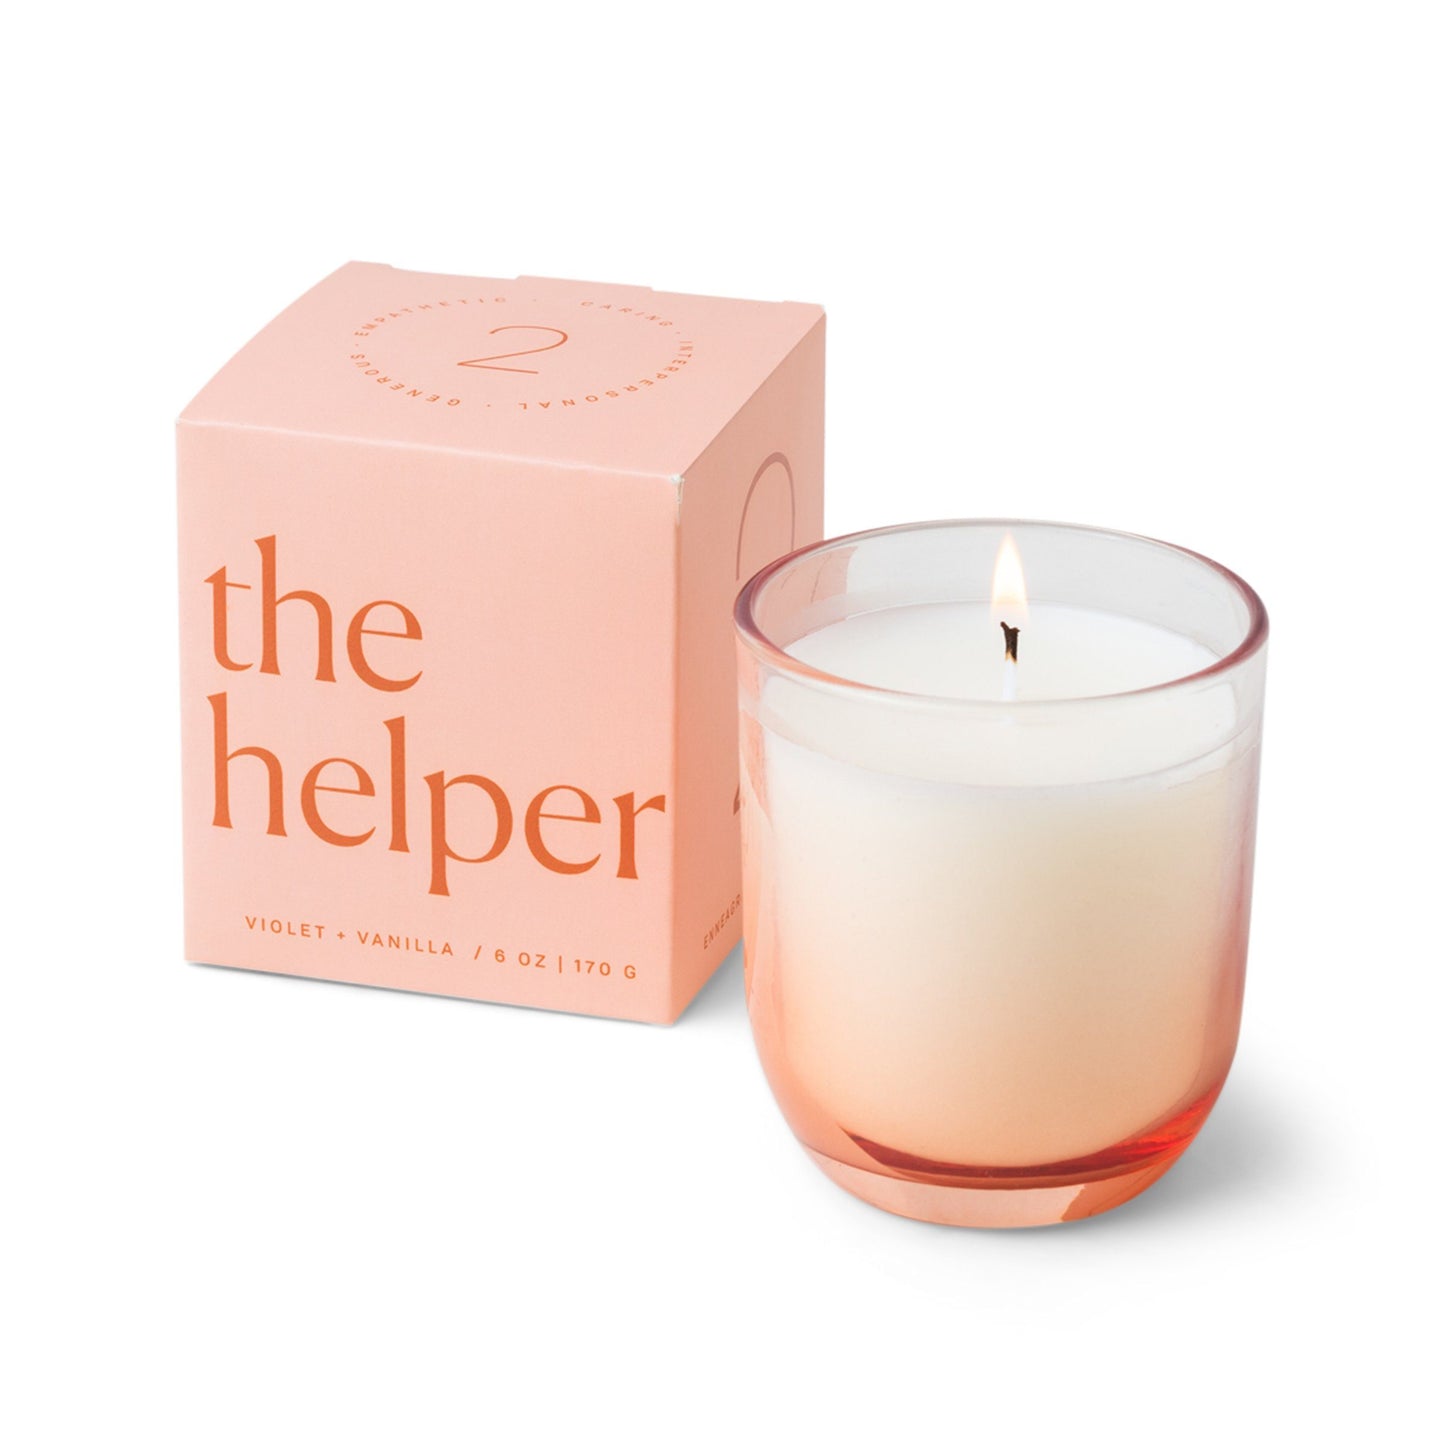 Candle with a vessel of clear glass that fades to an orange-pink at the bottom; pictured next to the pink “the helper” box